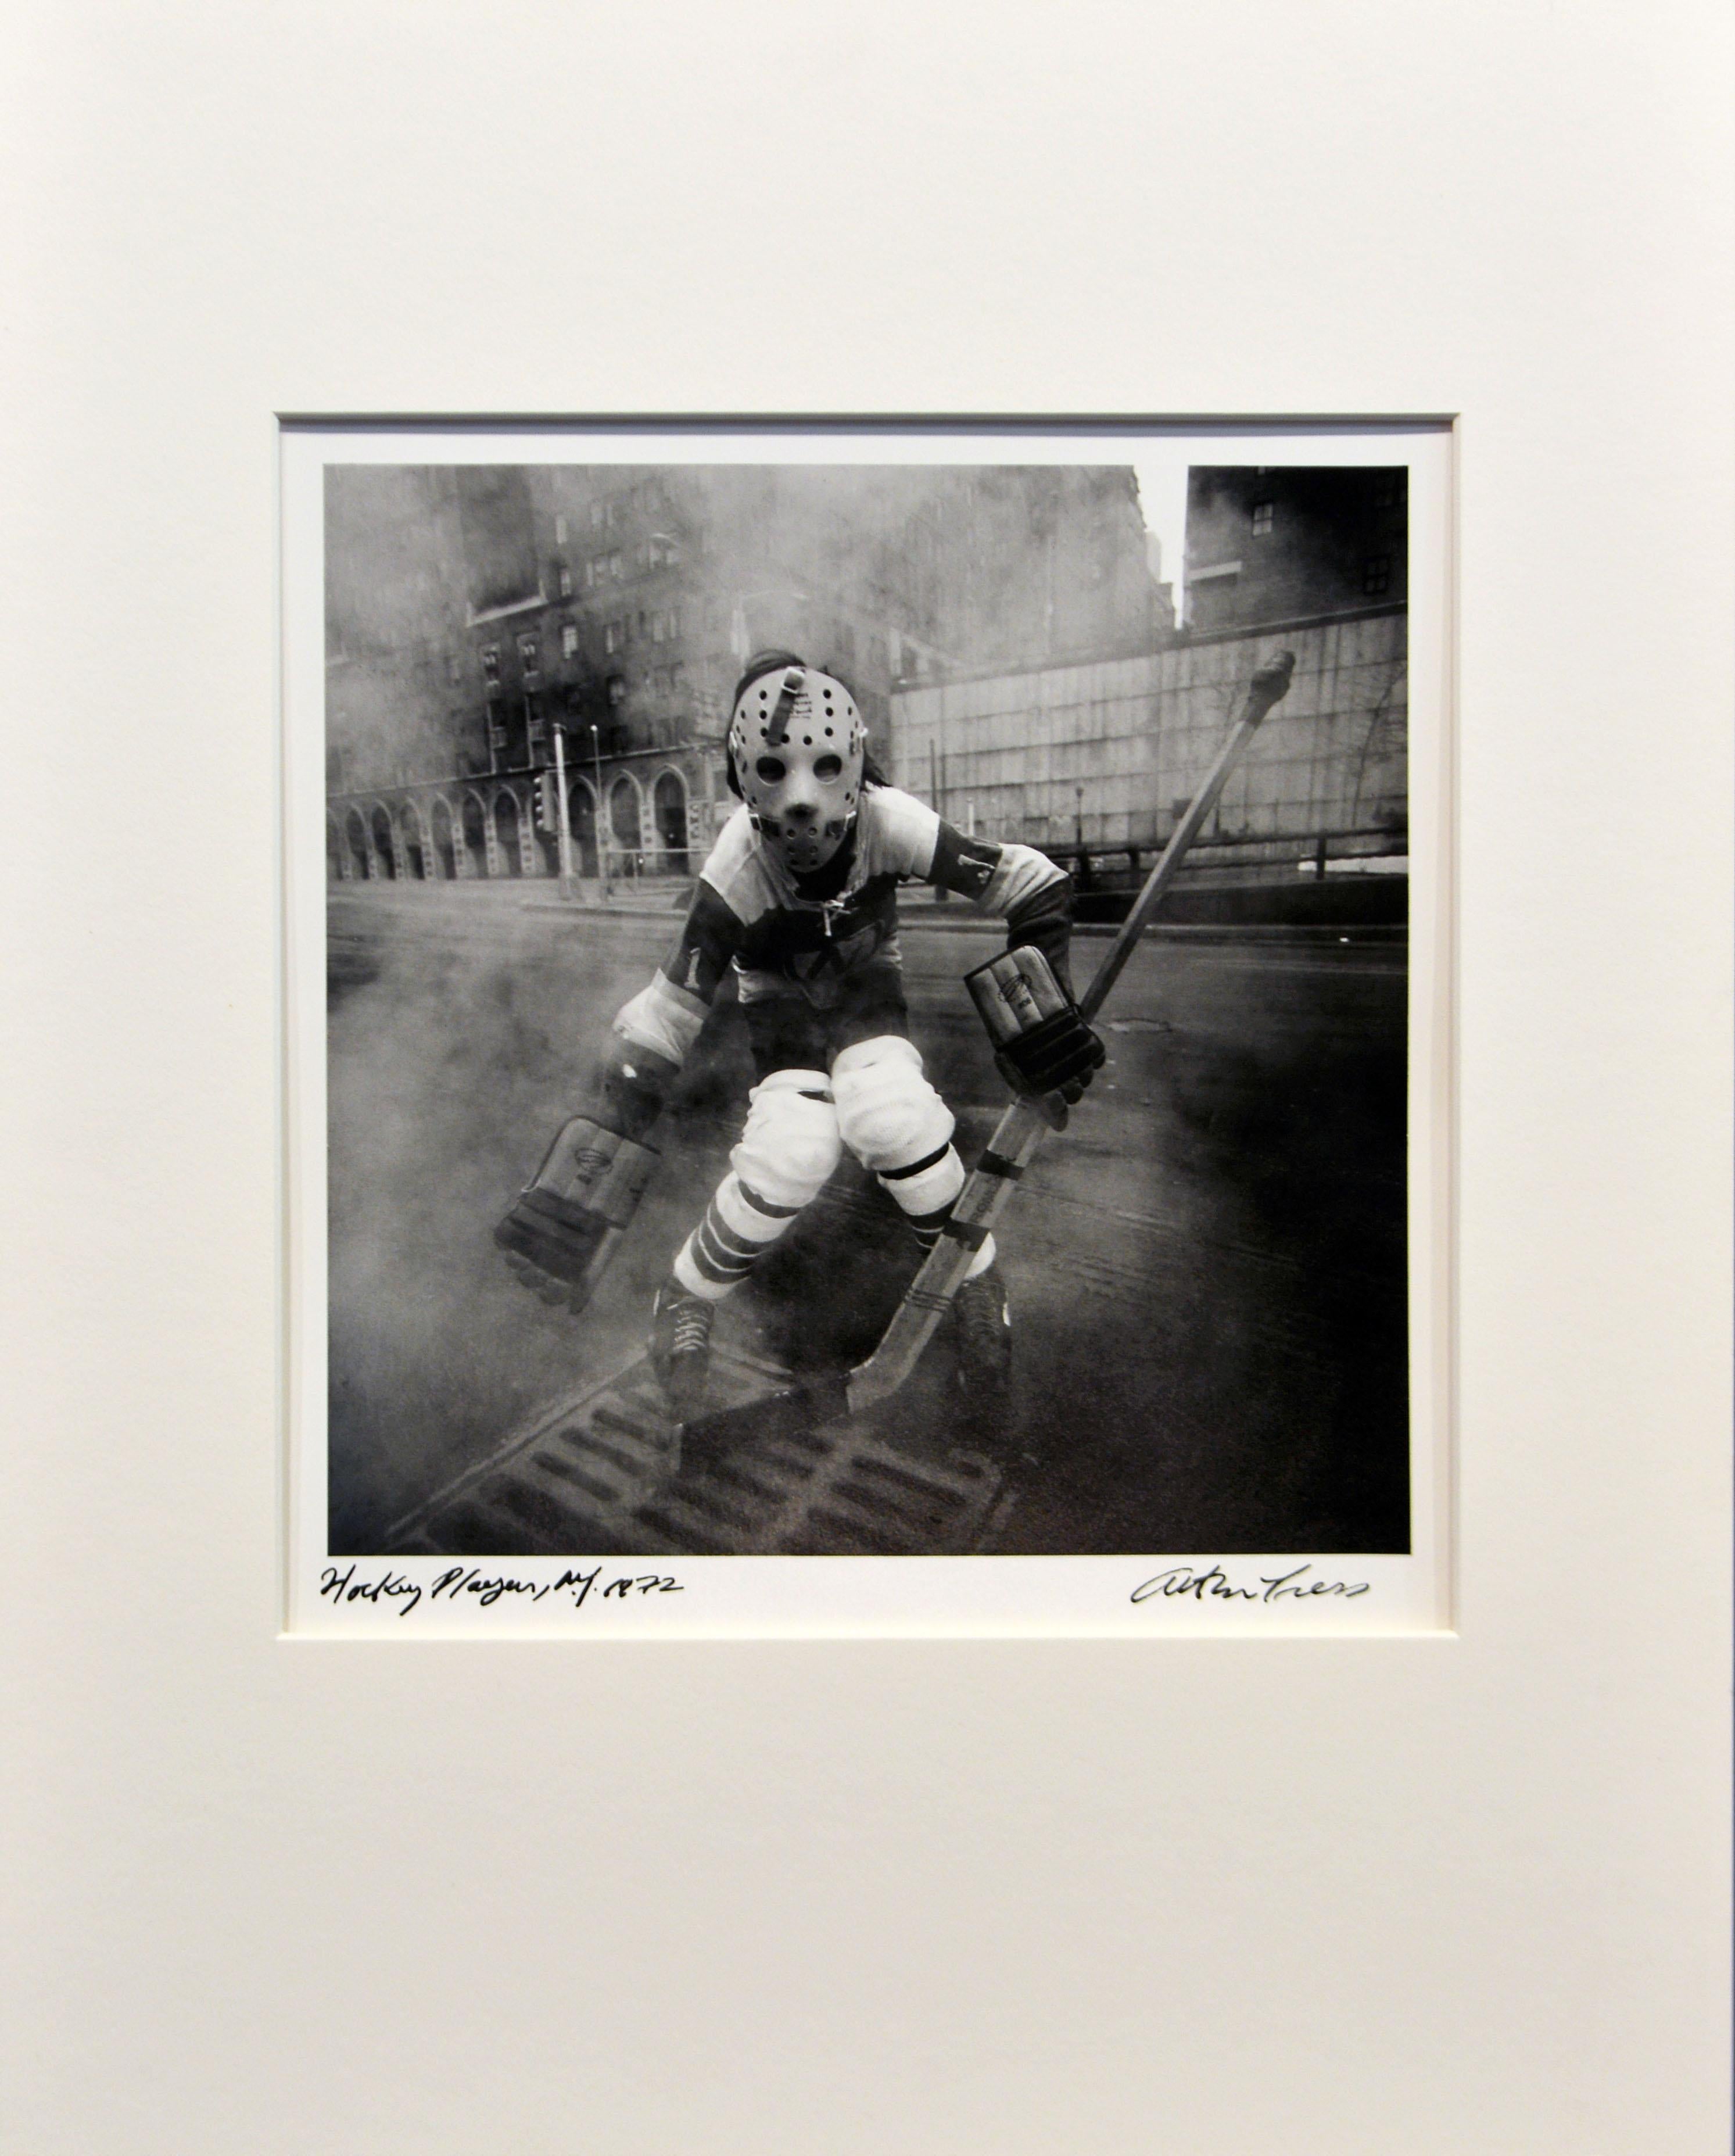 Arthur Tress (American b. 1940)
'Hockey Player 1972' Gelatin silver print. Photo taken 1970. Image: 10 x 10 in / 25.5 x 25.5 cm. Full margins. Mat: 16 x 20 in / 41 x 51 cm. This work is included full page in the book 'Fantastic Voyage, Photographs